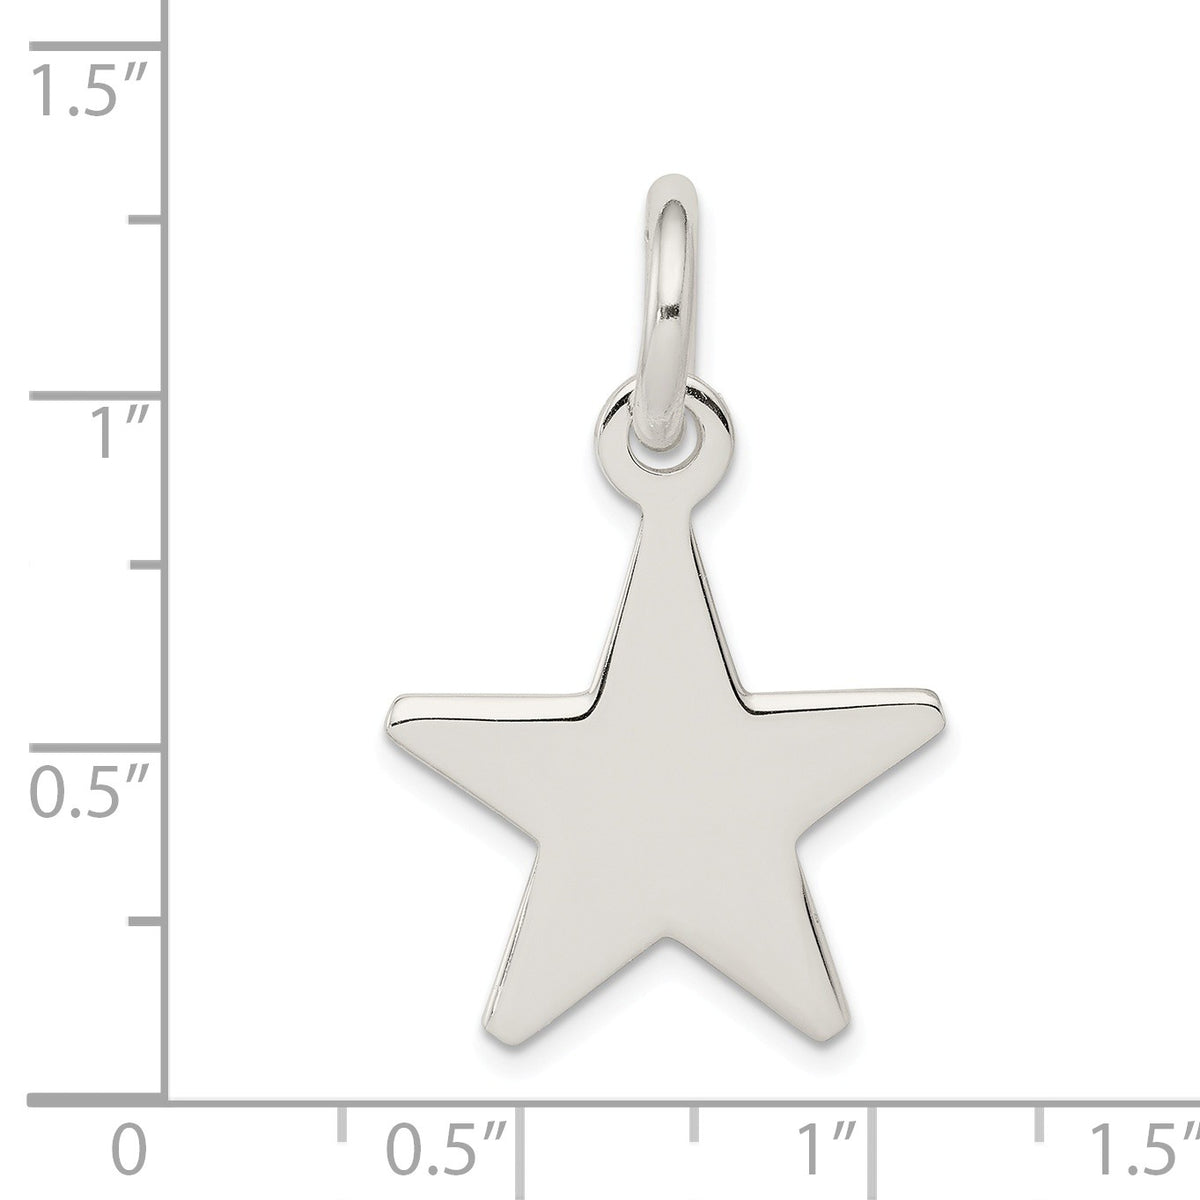 Alternate view of the Sterling Silver 20mm Polished Flat Star Pendant by The Black Bow Jewelry Co.